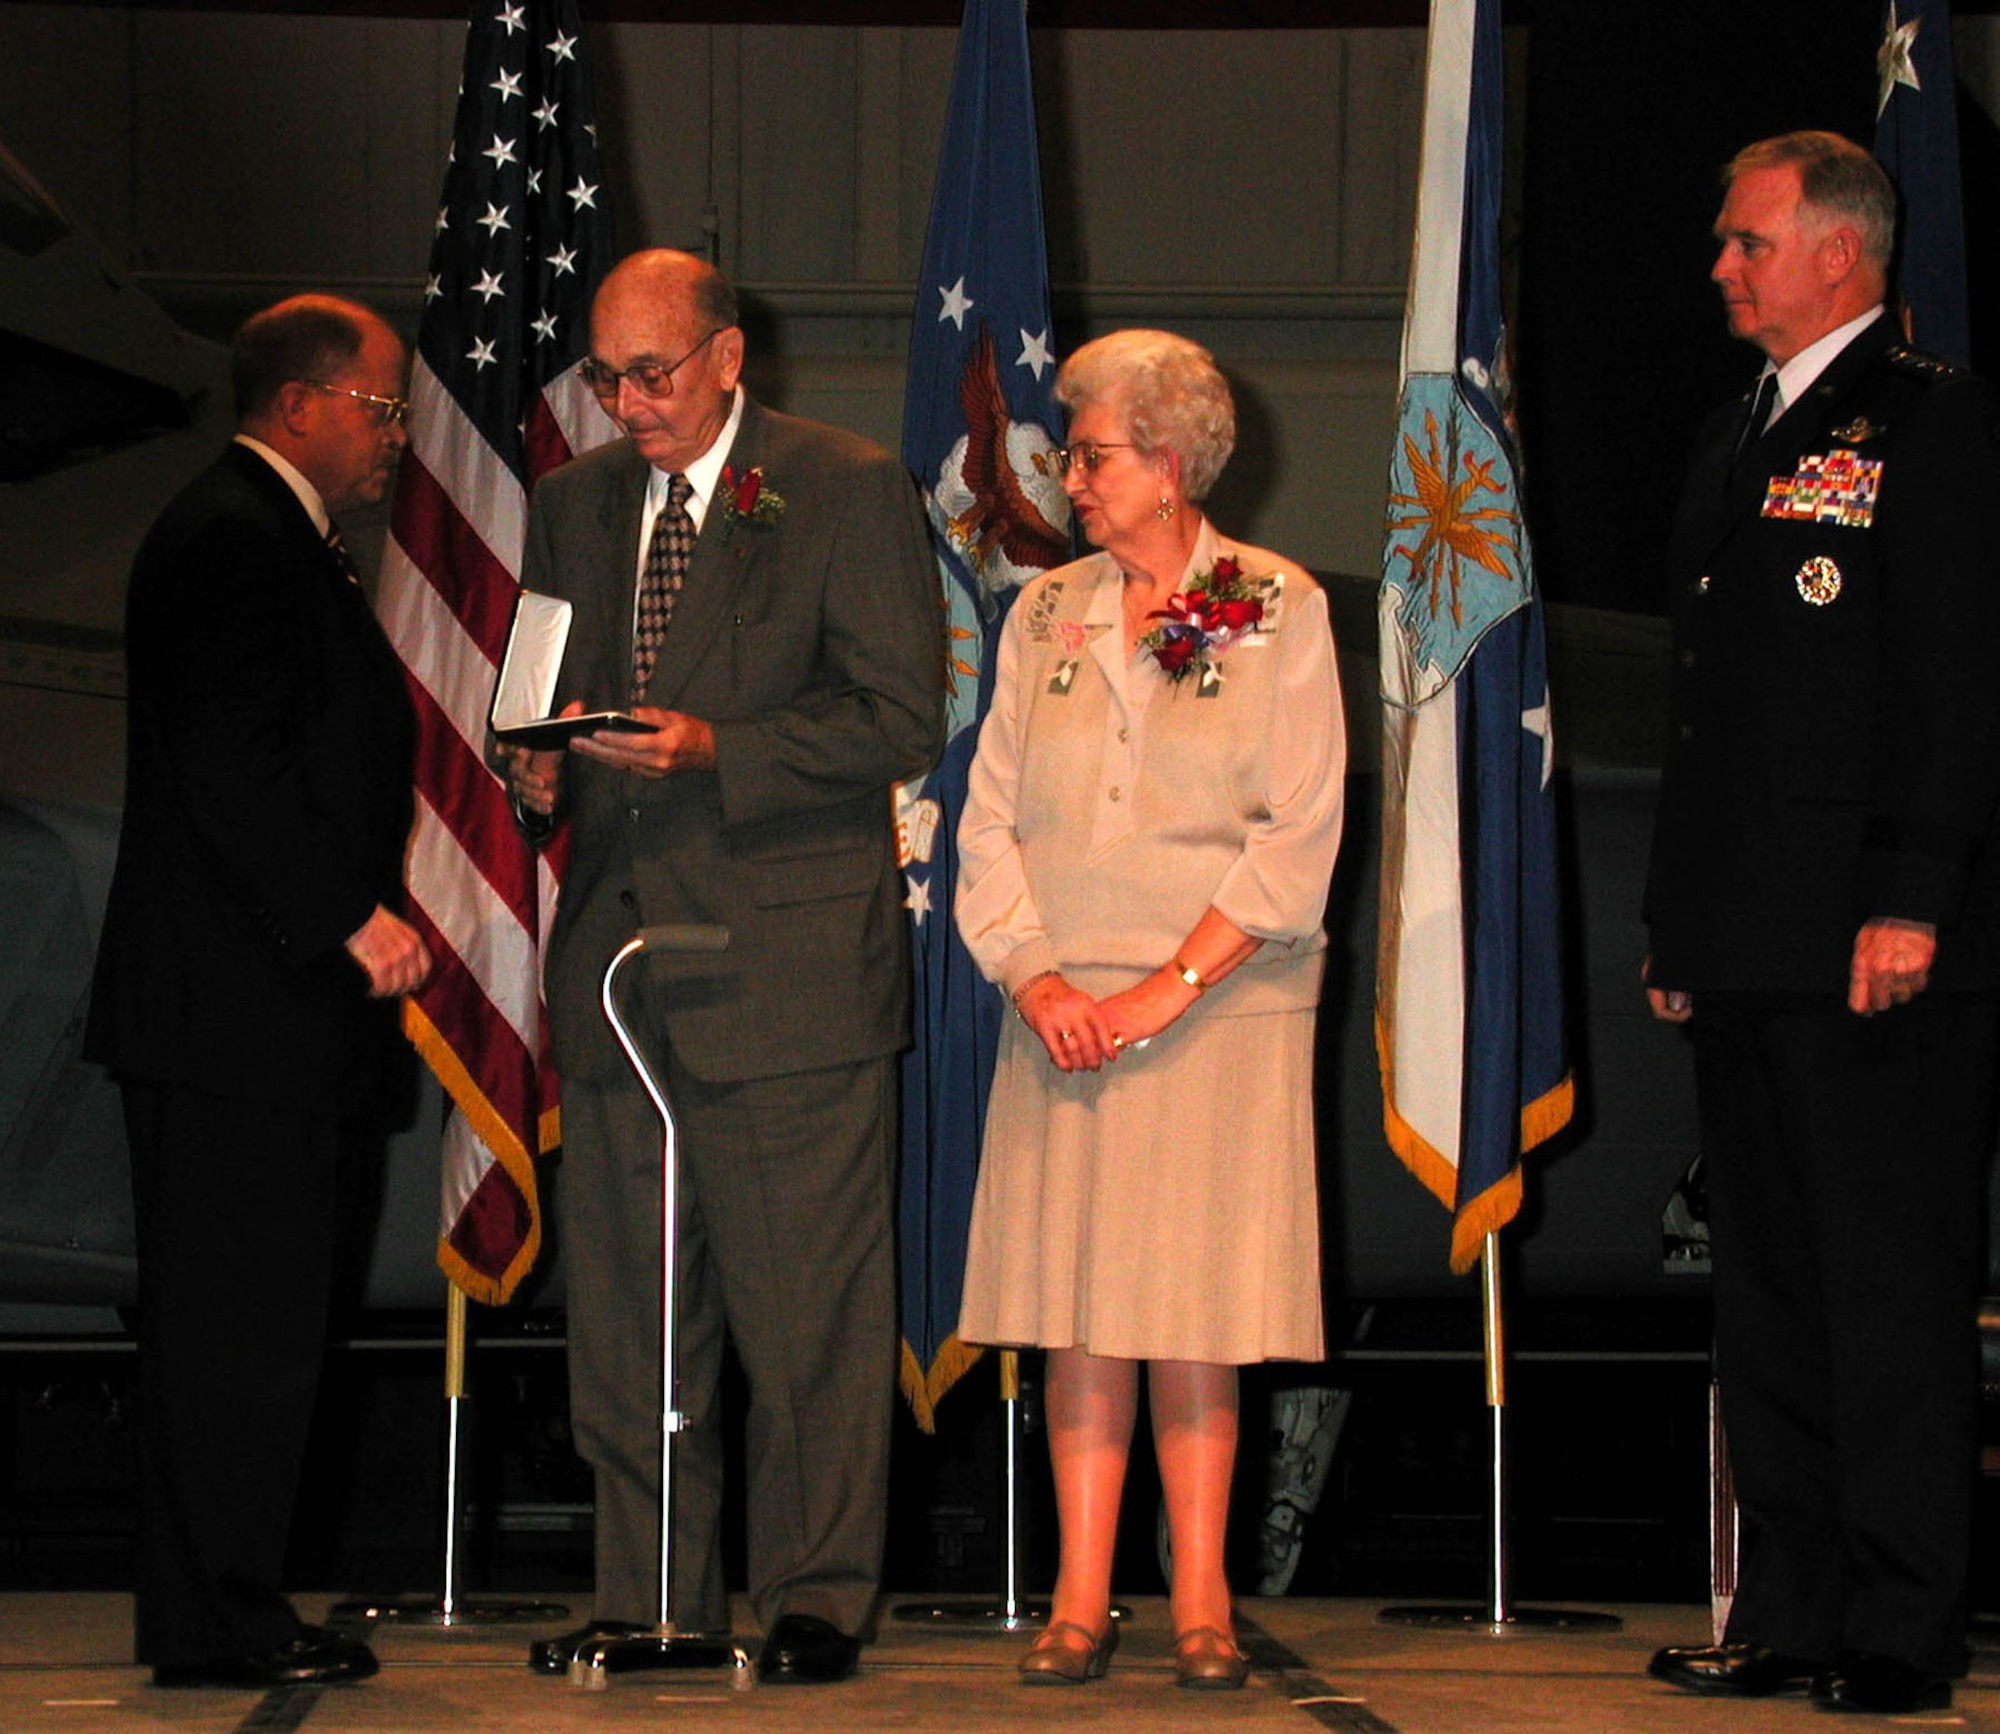 Sometimes, awards and decorations are presented posthumously. In a ceremony held at the National Museum of the U.S. Air Force on Dec. 8, 2000, Secretary of the Air Force F. Whitten "Whit" Peters presented the Medal of Honor to the parents, William F. and Alice Pitsenbarger, of Airman 1st Class William F. Pitsenbarger. Air Force Chief of Staff Gen. Michael E. Ryan (right) and about 1,800 guests attended the ceremony. (U.S. Air Force photo)